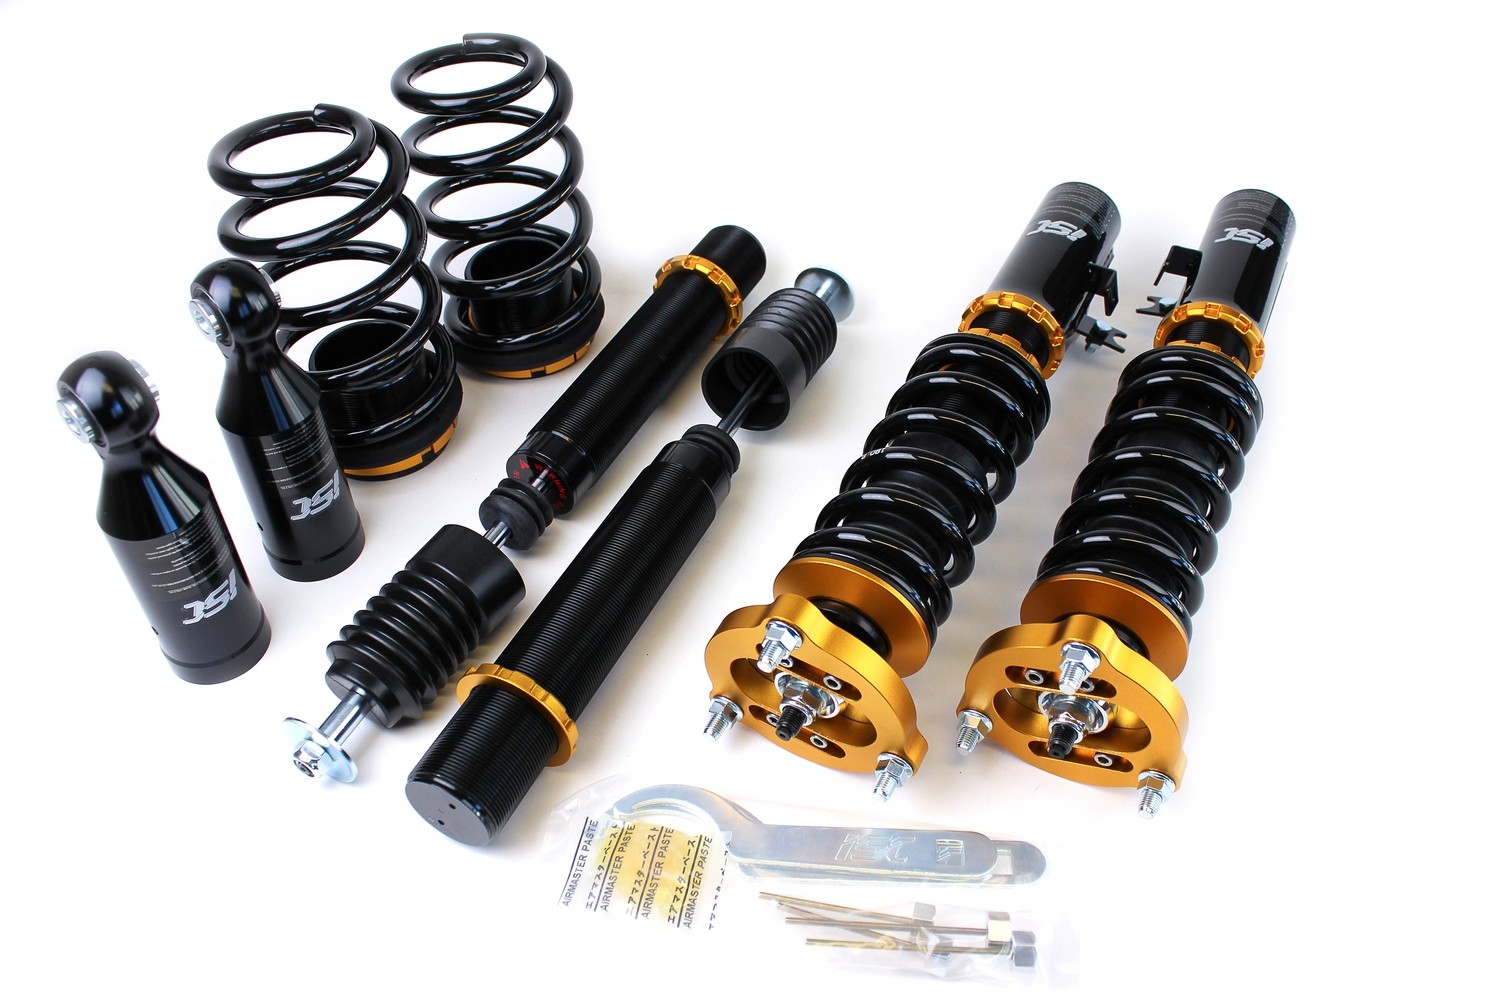 CLEARANCE Honda Civic (06-11) ISC N1 Coilover Suspension - Street Sport Valving